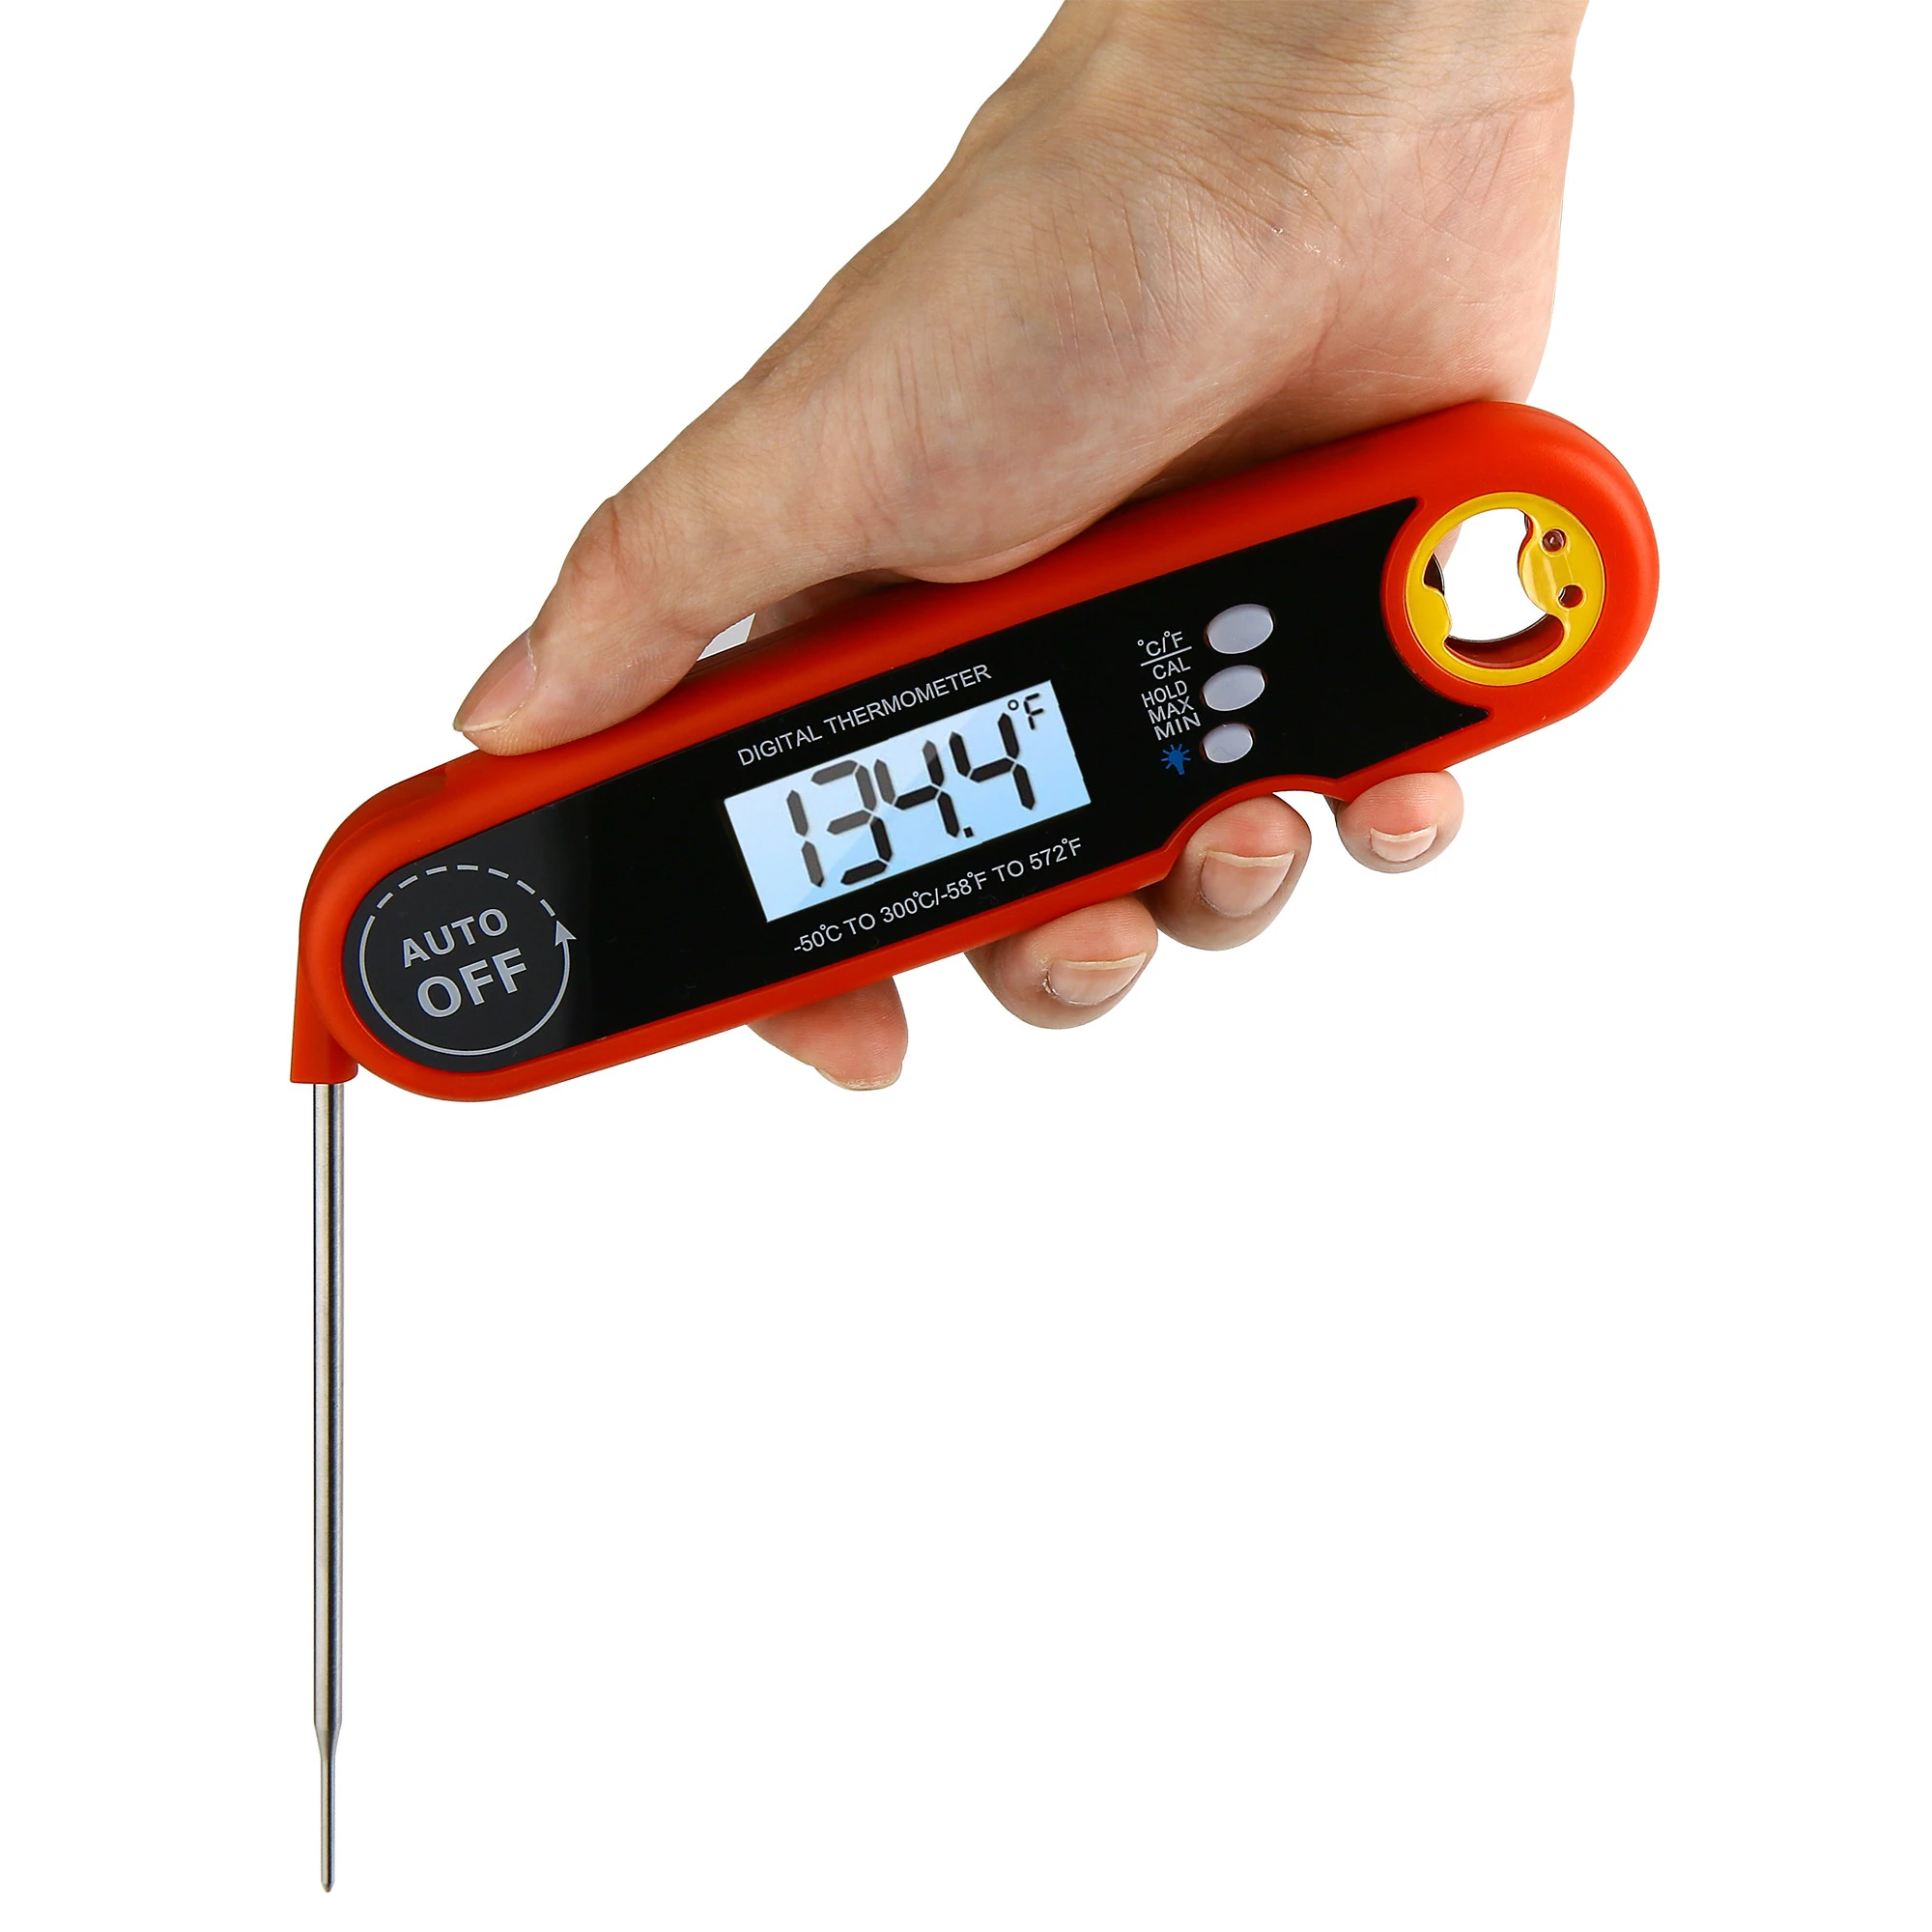 Folding Waterproof IP67 Digital Instant Read BBQ Meat Cooking Thermometer With Bottle Opener and Backlight